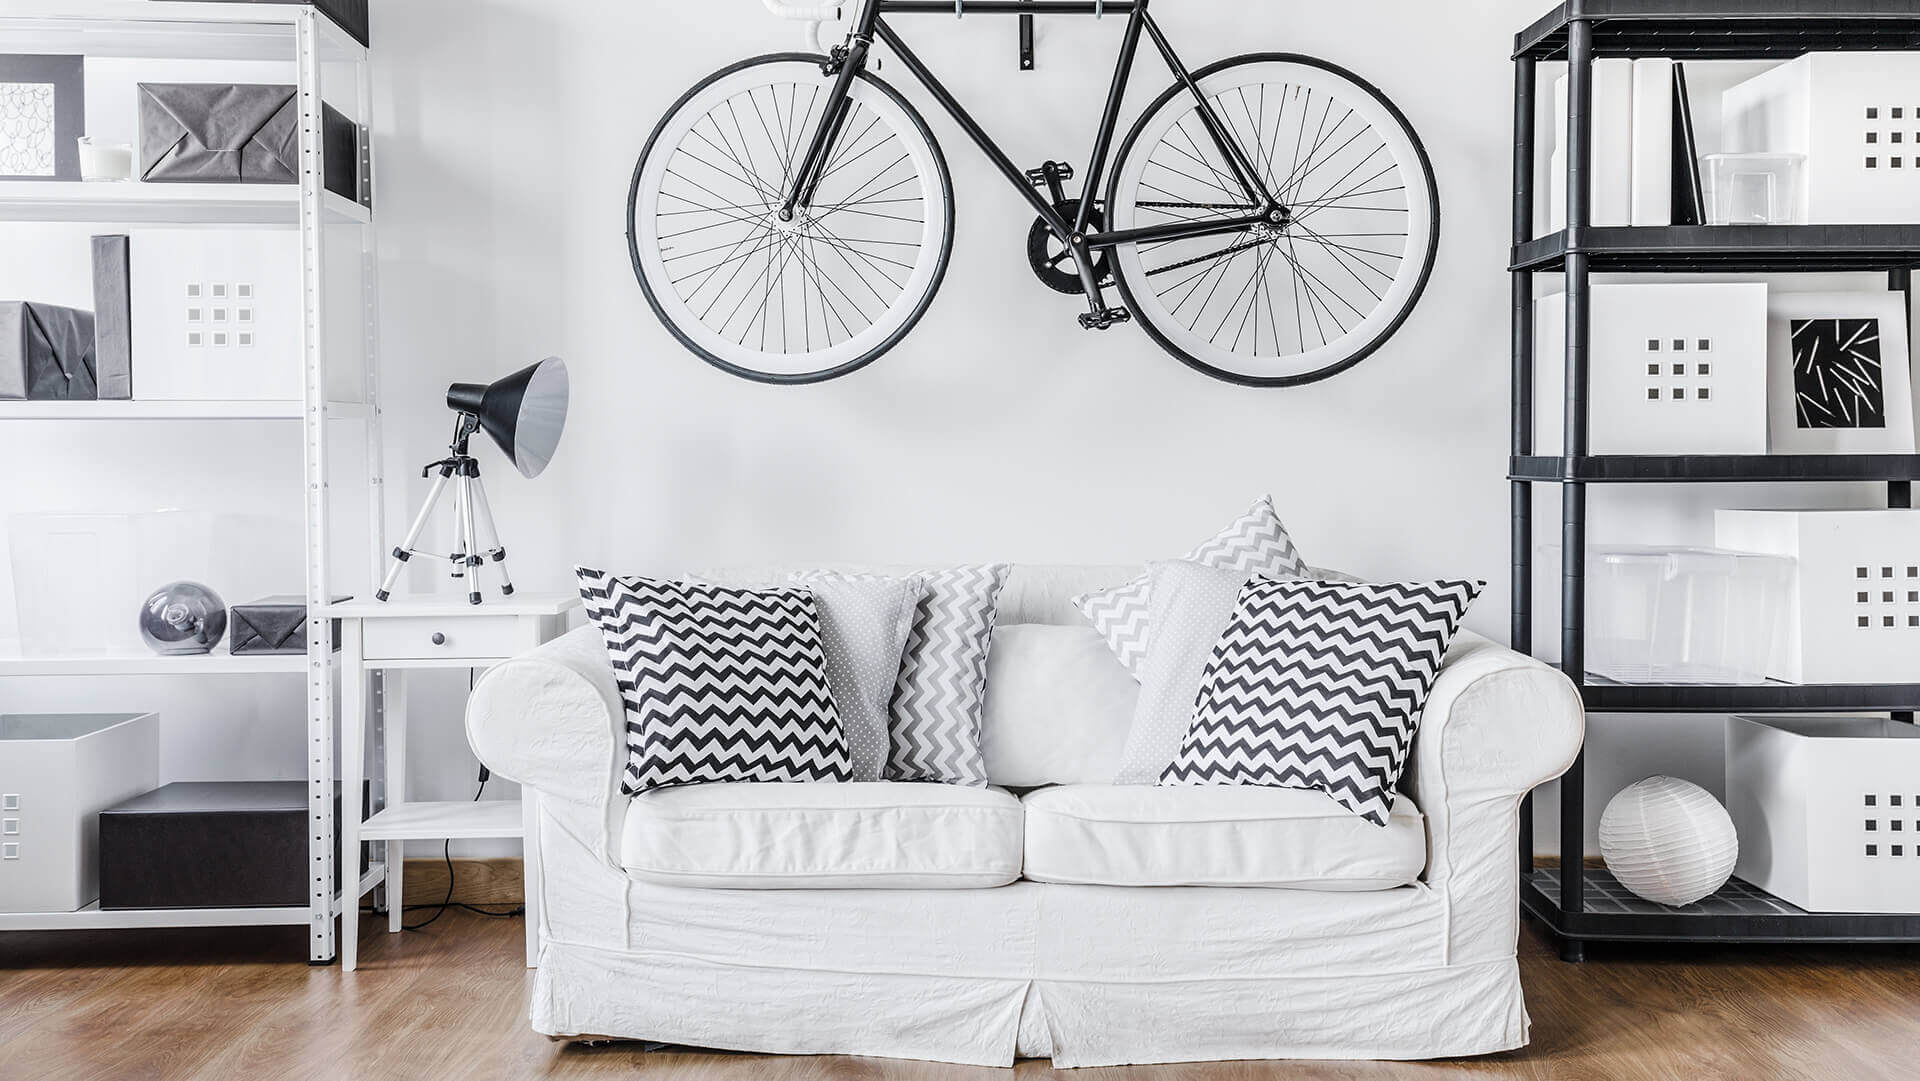 Black elegant cycle for wall decorate